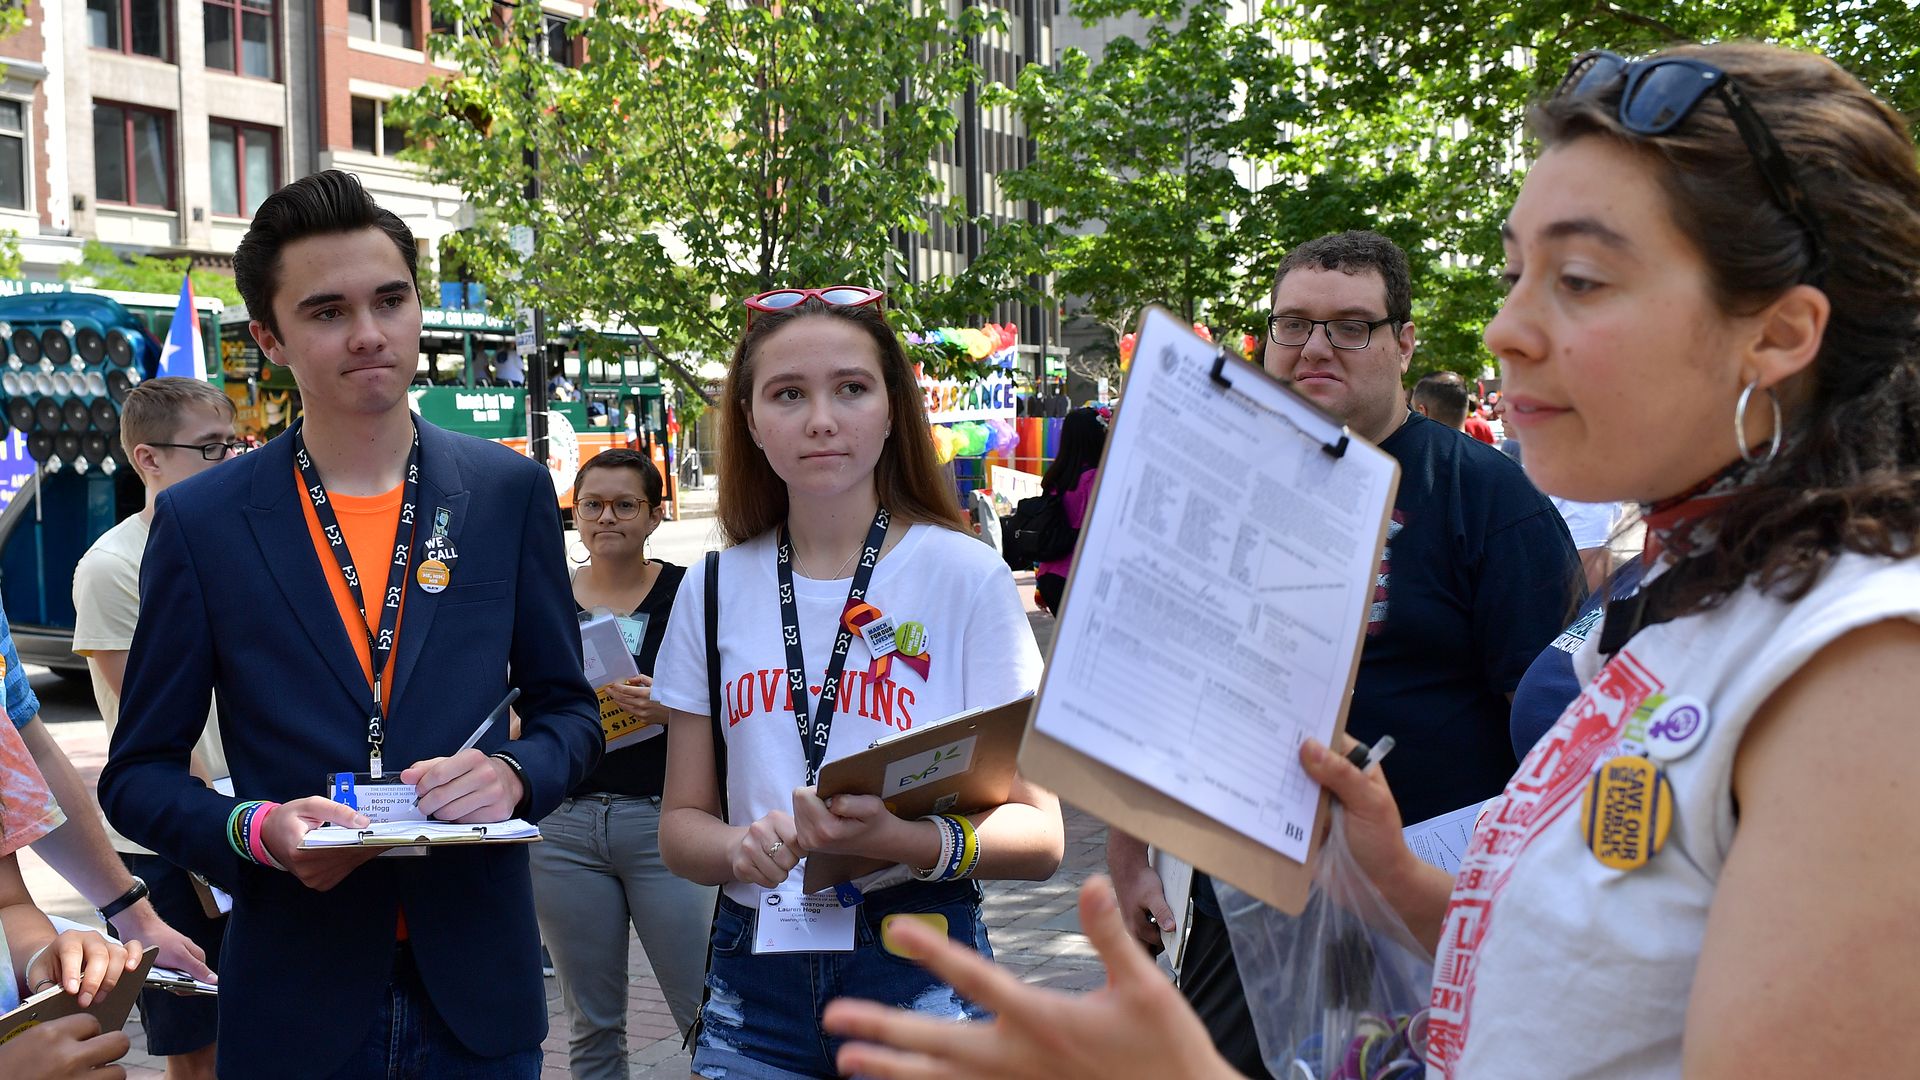 Activists getting signatures for a ballot initiative in Boston